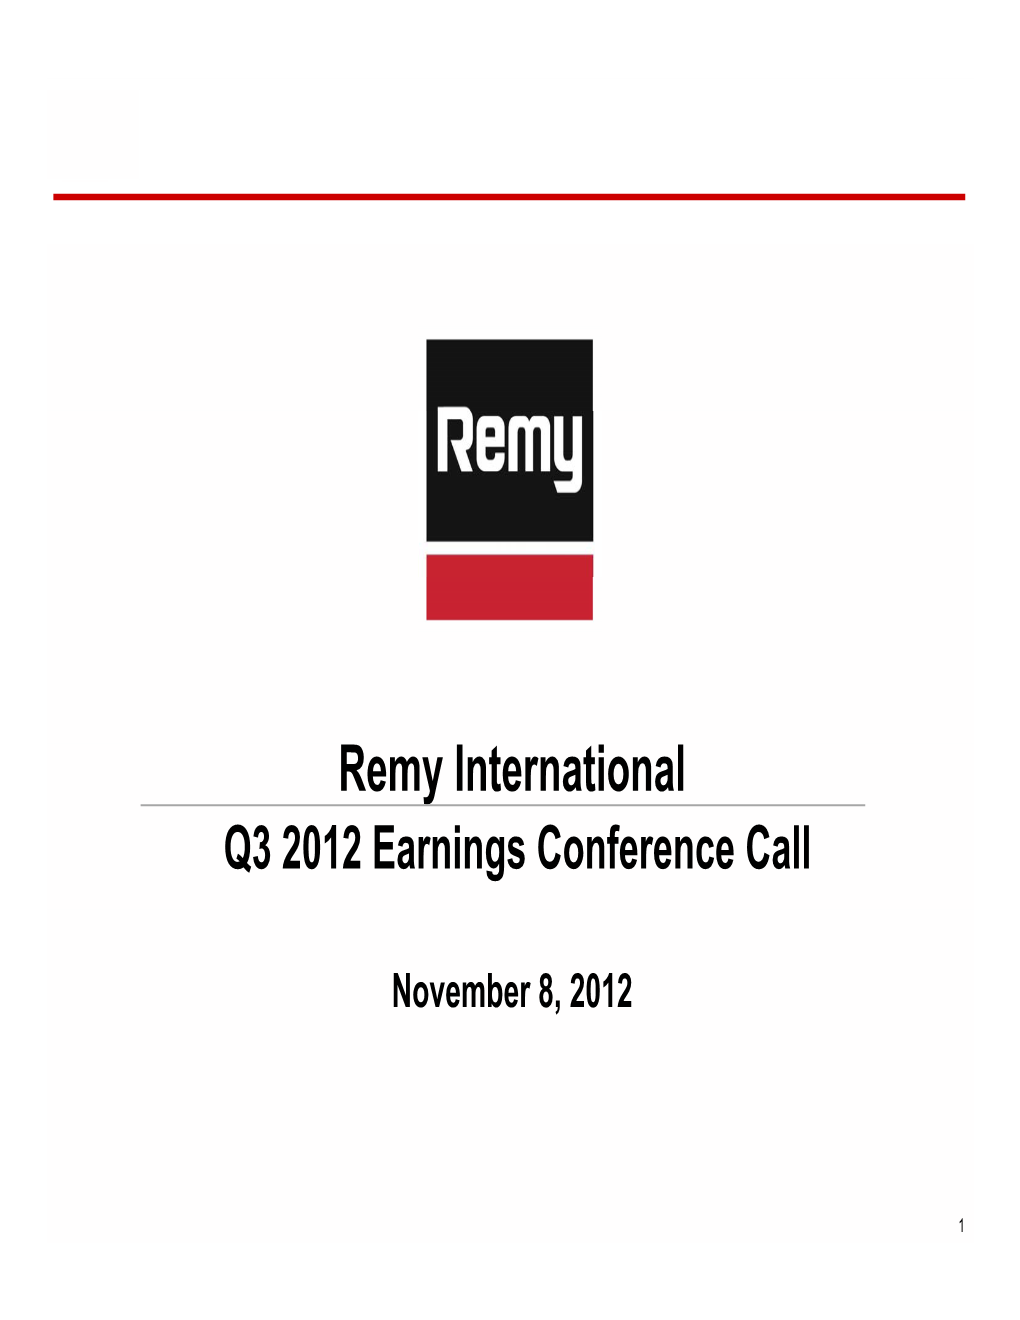 Remy International Q3 2012 Earnings Conference Call